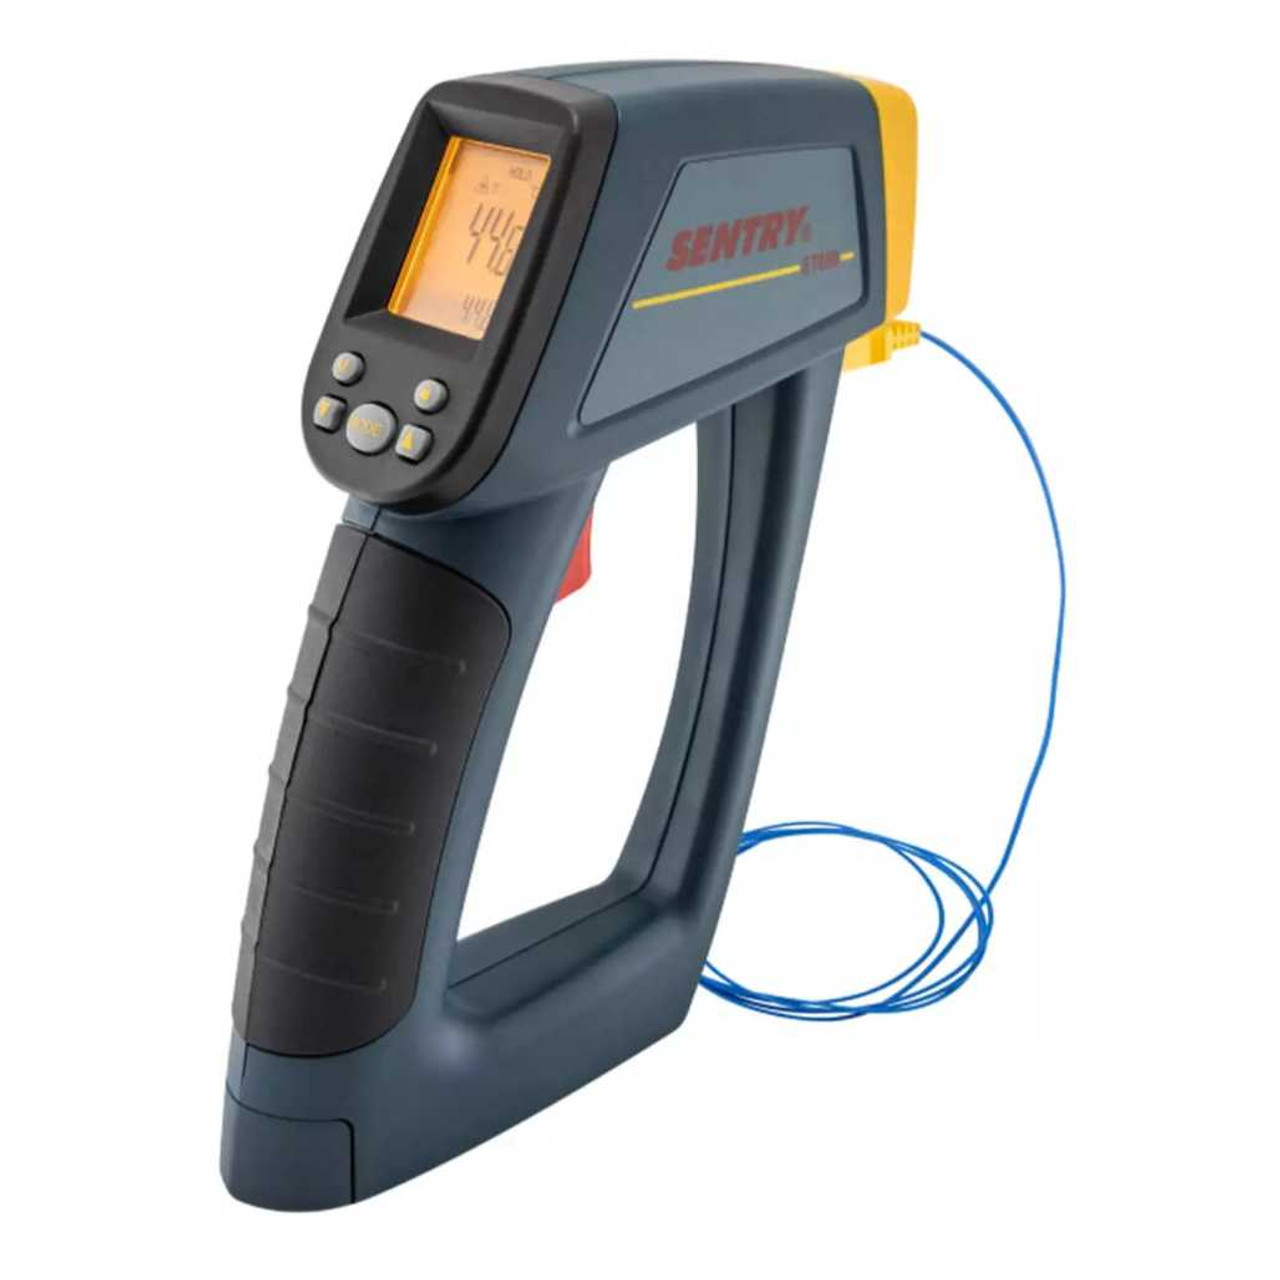 https://cdn11.bigcommerce.com/s-sgprcd6/images/stencil/1280x1280/products/670/16836/Infrared_Thermometer_-501000C_DS_30-1_Adjustable_-_ST685-2__18017.1644764575.jpg?c=2